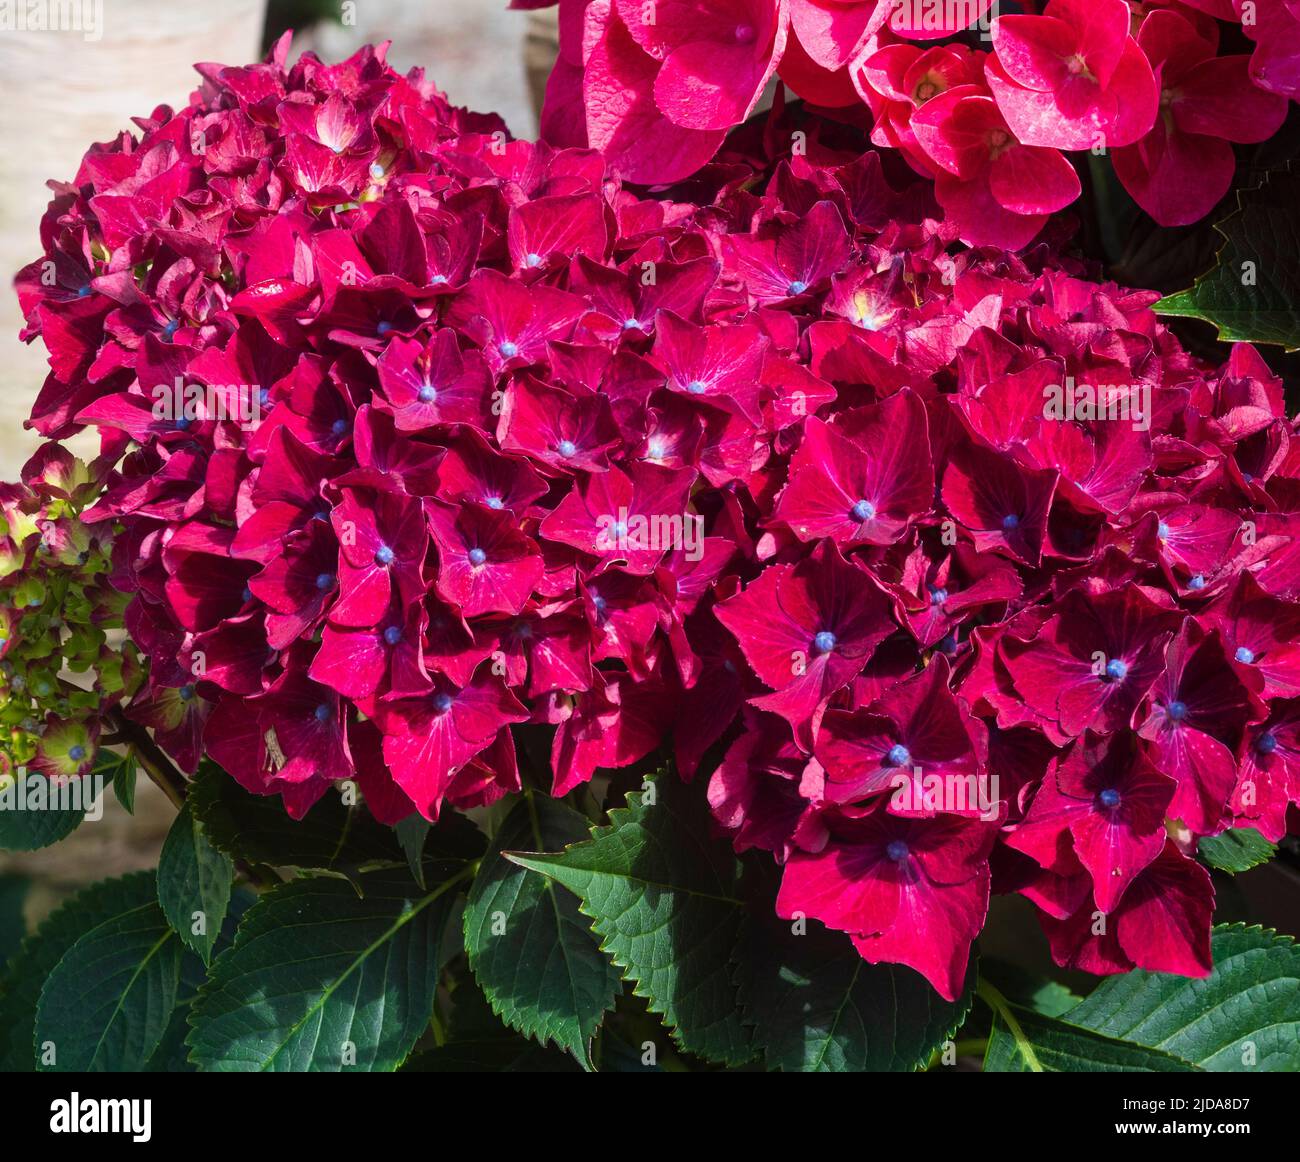 Mophead flowers of the hardy deciduous shrub, Hydangea macrophylla 'Hot Red Purple' Stock Photo